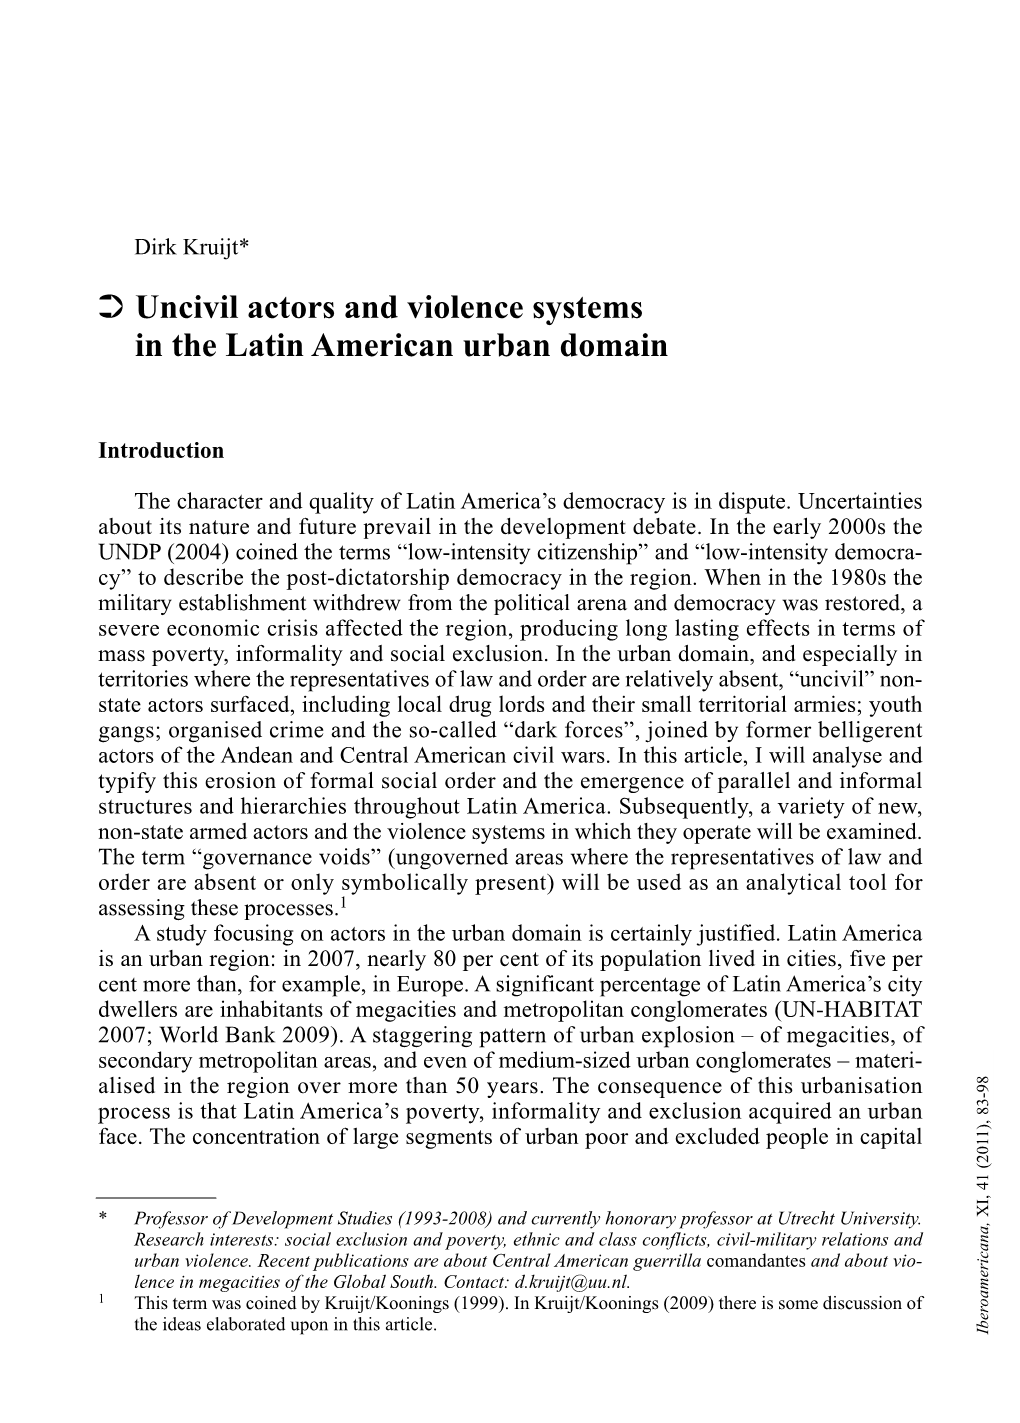 Uncivil Actors and Violence Systems in the Latin American Urban Domain